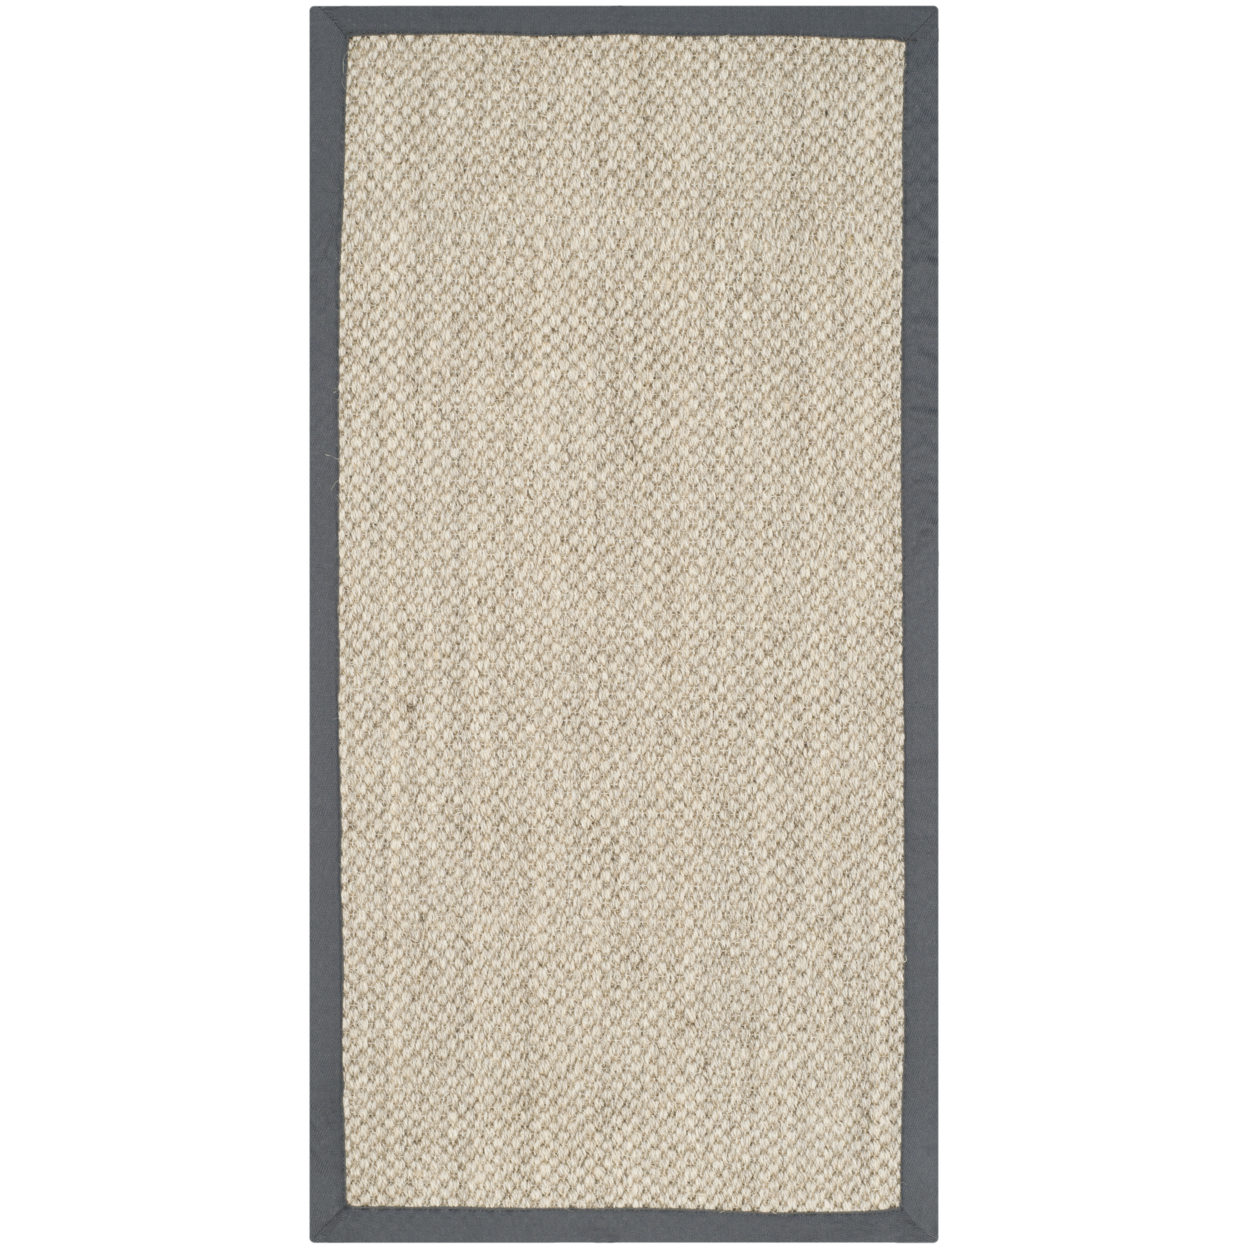 SAFAVIEH Natural Fiber Collection NF443B Marble/Grey Rug - 2' 6 X 4'